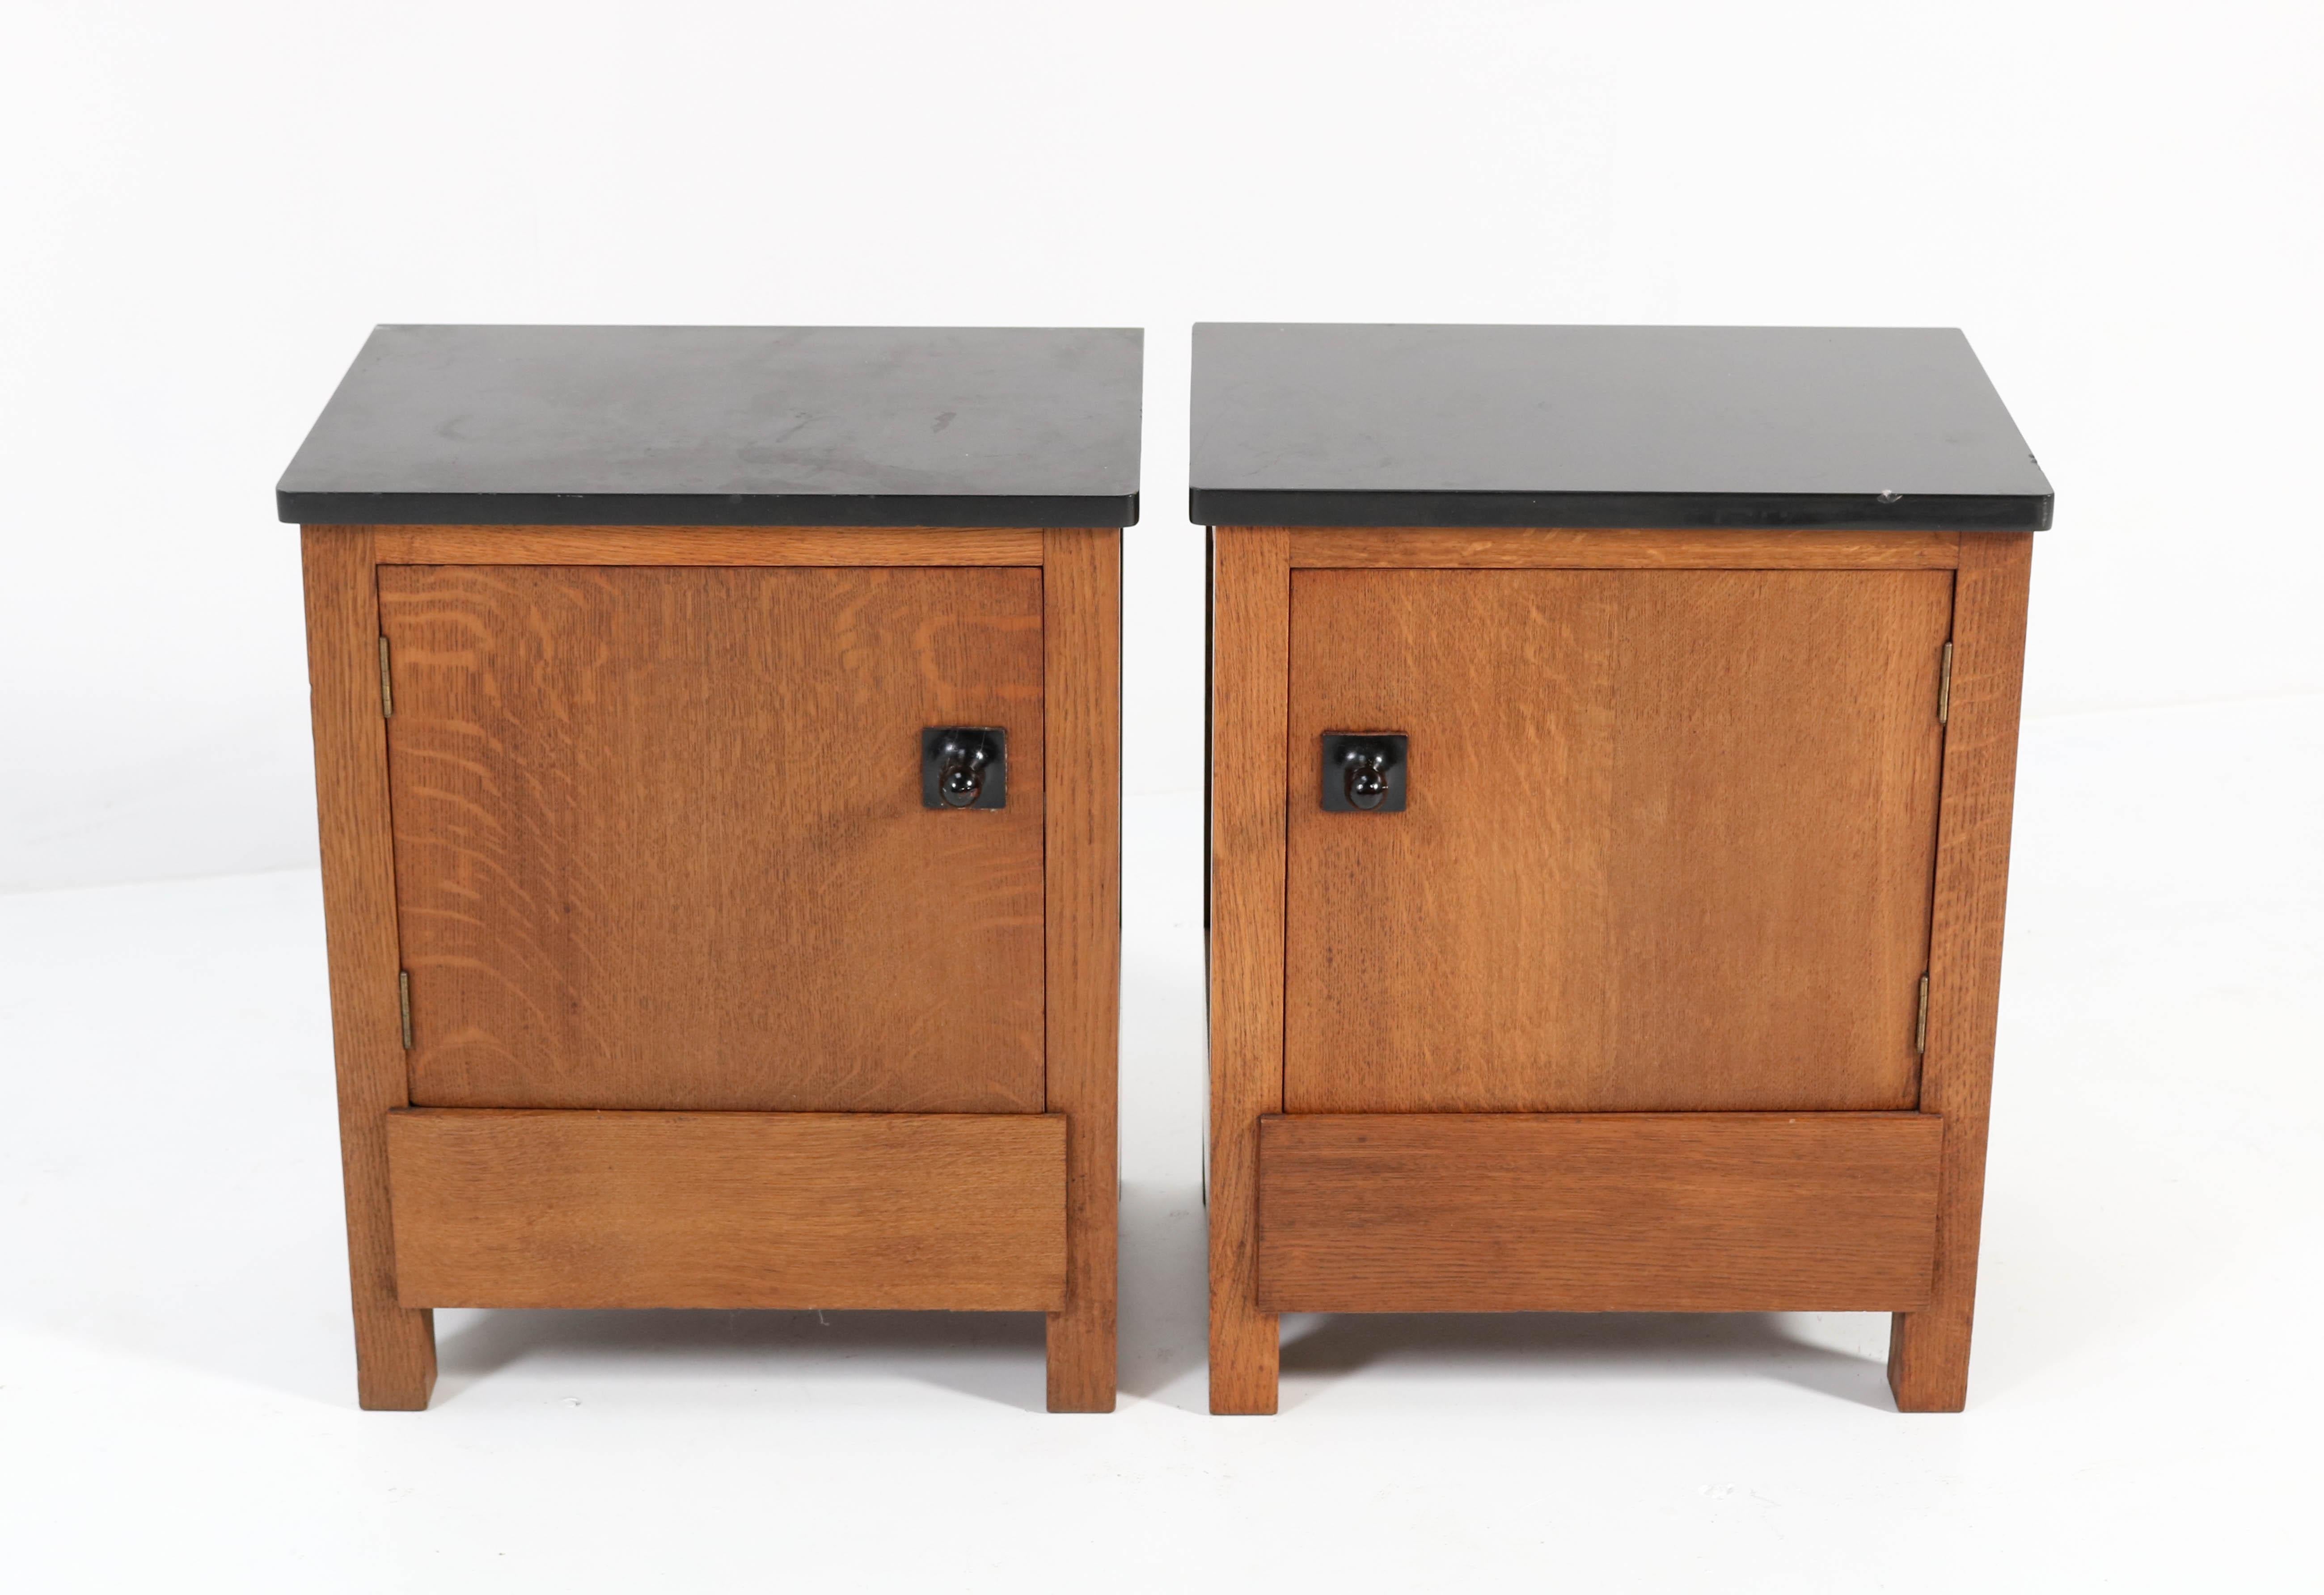 Magnificent and rare pair of Art Deco Haagse School nightstands or bedside tables.
Design by Hendrik Wouda for H. Pander & Zonen.
Striking Dutch design from the twenties.
Solid oak with original black granite tops.
Marked with original manufacturers